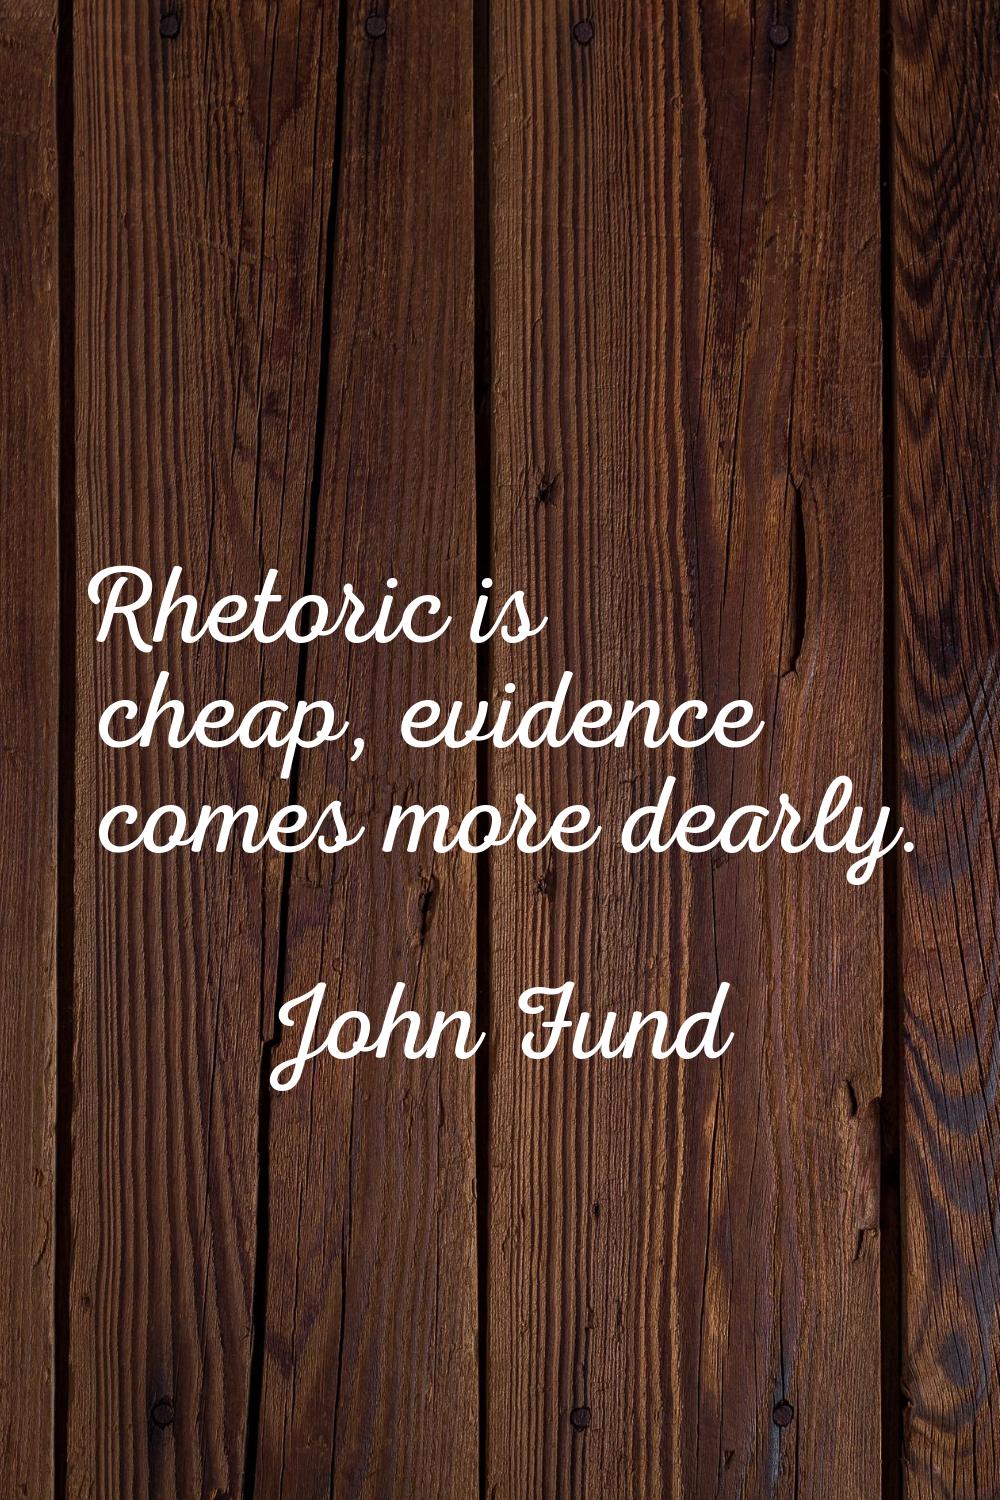 Rhetoric is cheap, evidence comes more dearly.